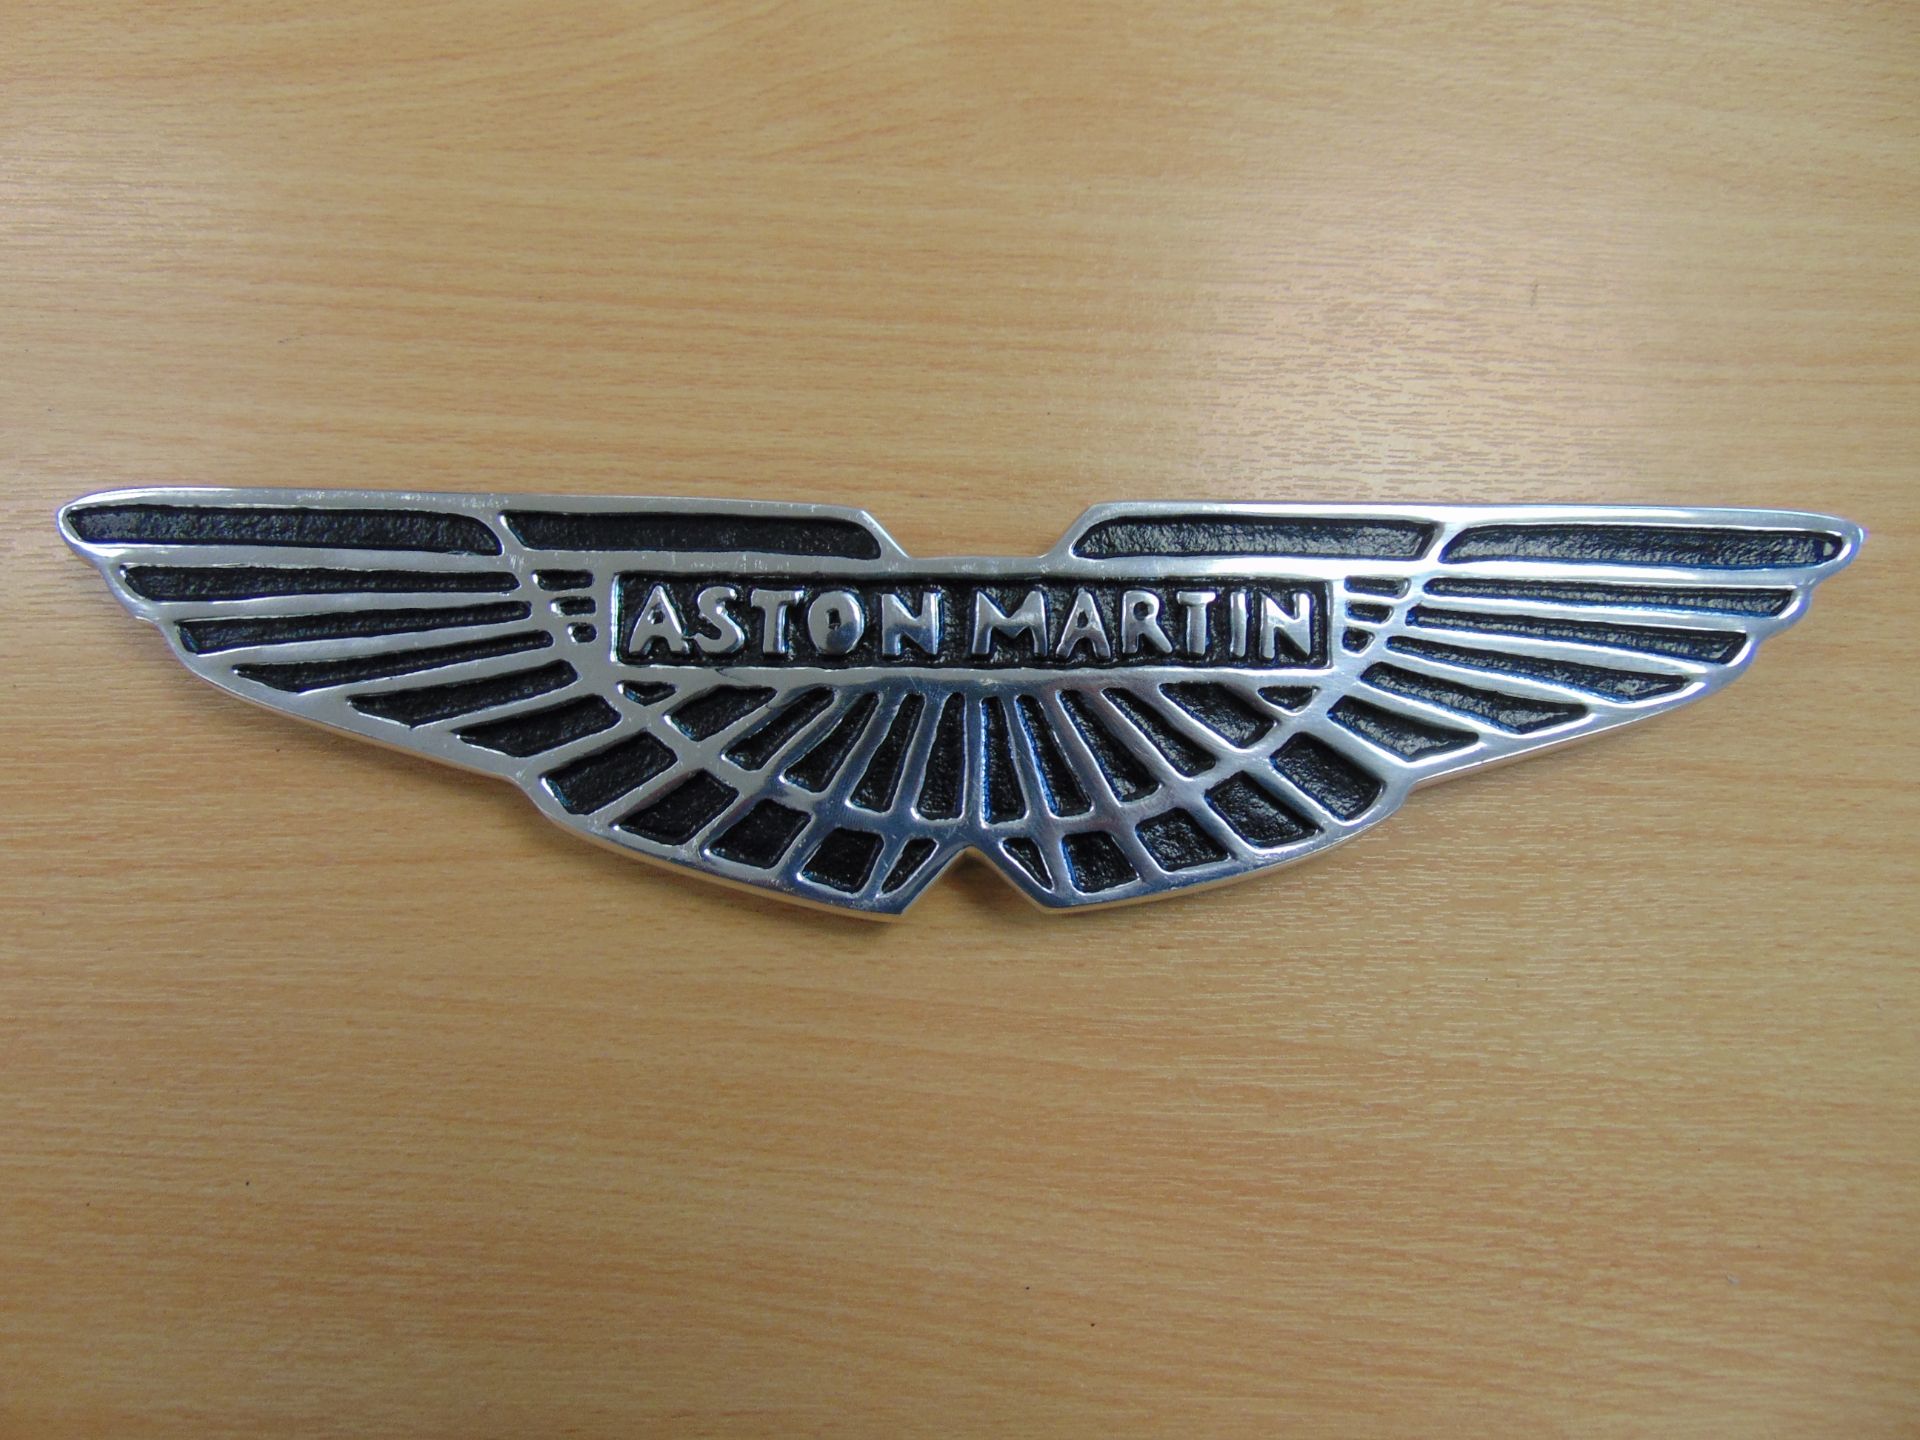 2 x Aston Martin Polished Aluminium Signs and Plaque - Image 2 of 7